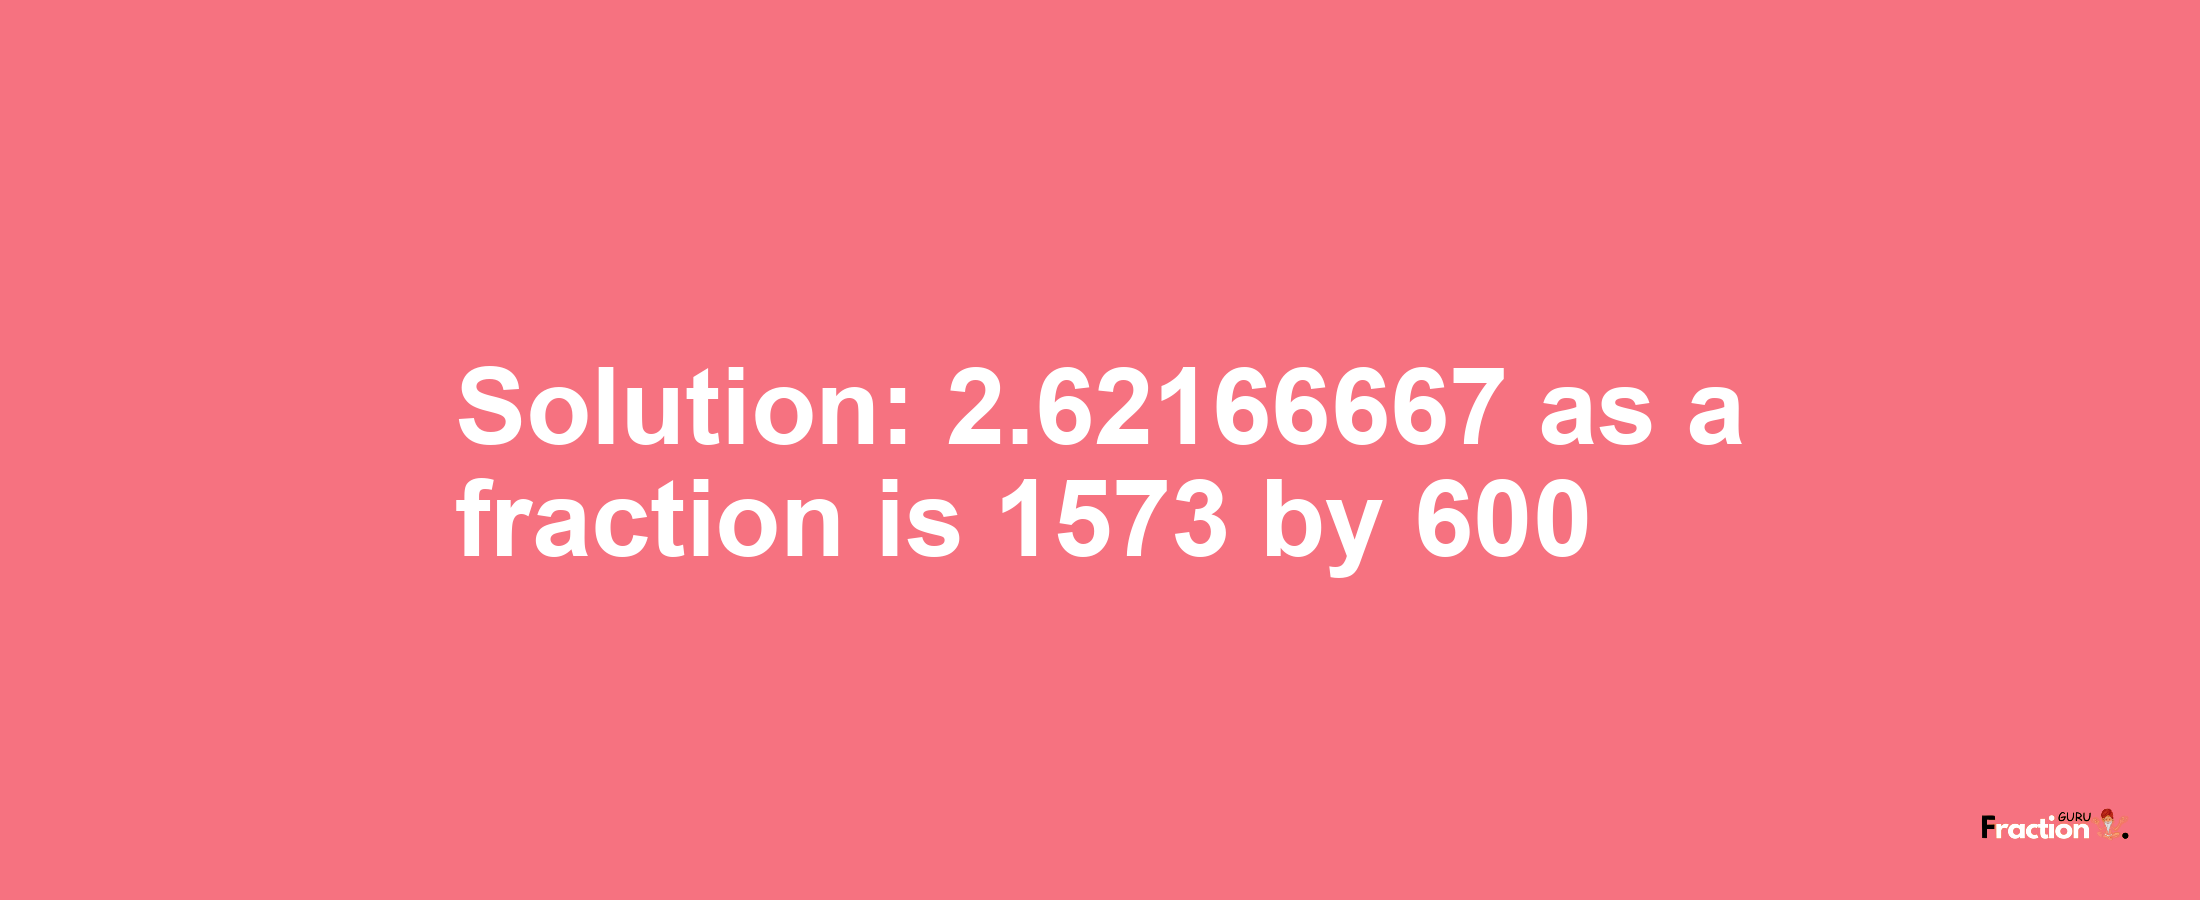 Solution:2.62166667 as a fraction is 1573/600